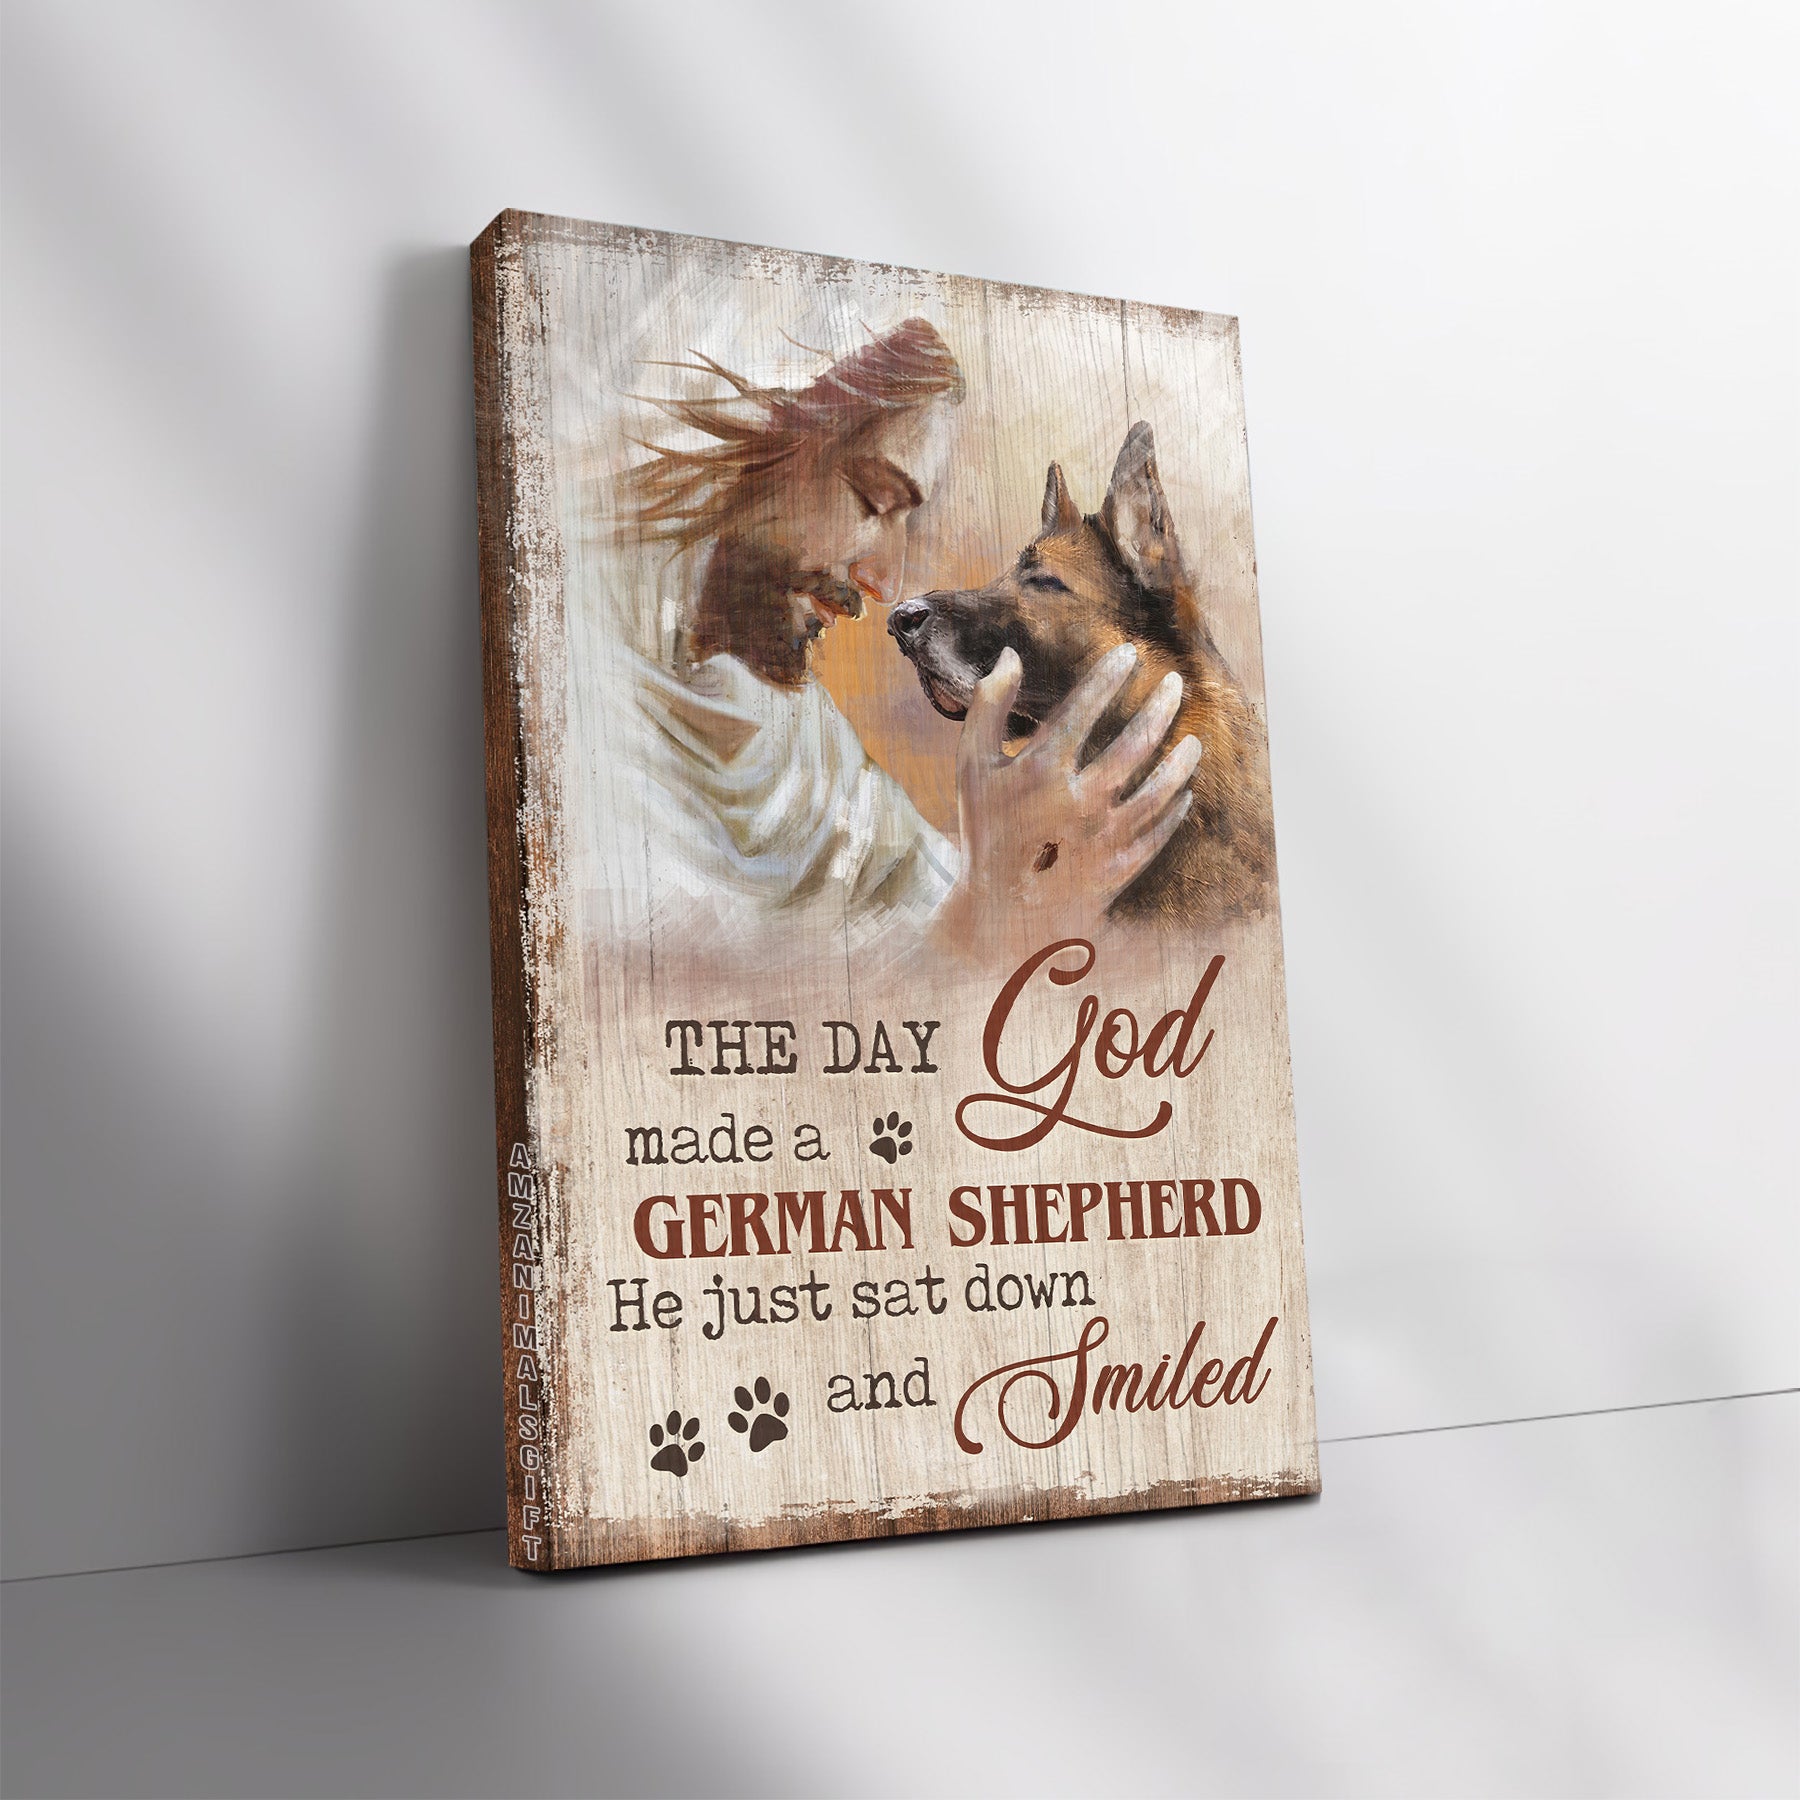 Jesus Portrait Premium Wrapped Canvas - Jesus painting, German Shepherd, The day God made a German Shepherd - Gift for Christian, Dog Lovers